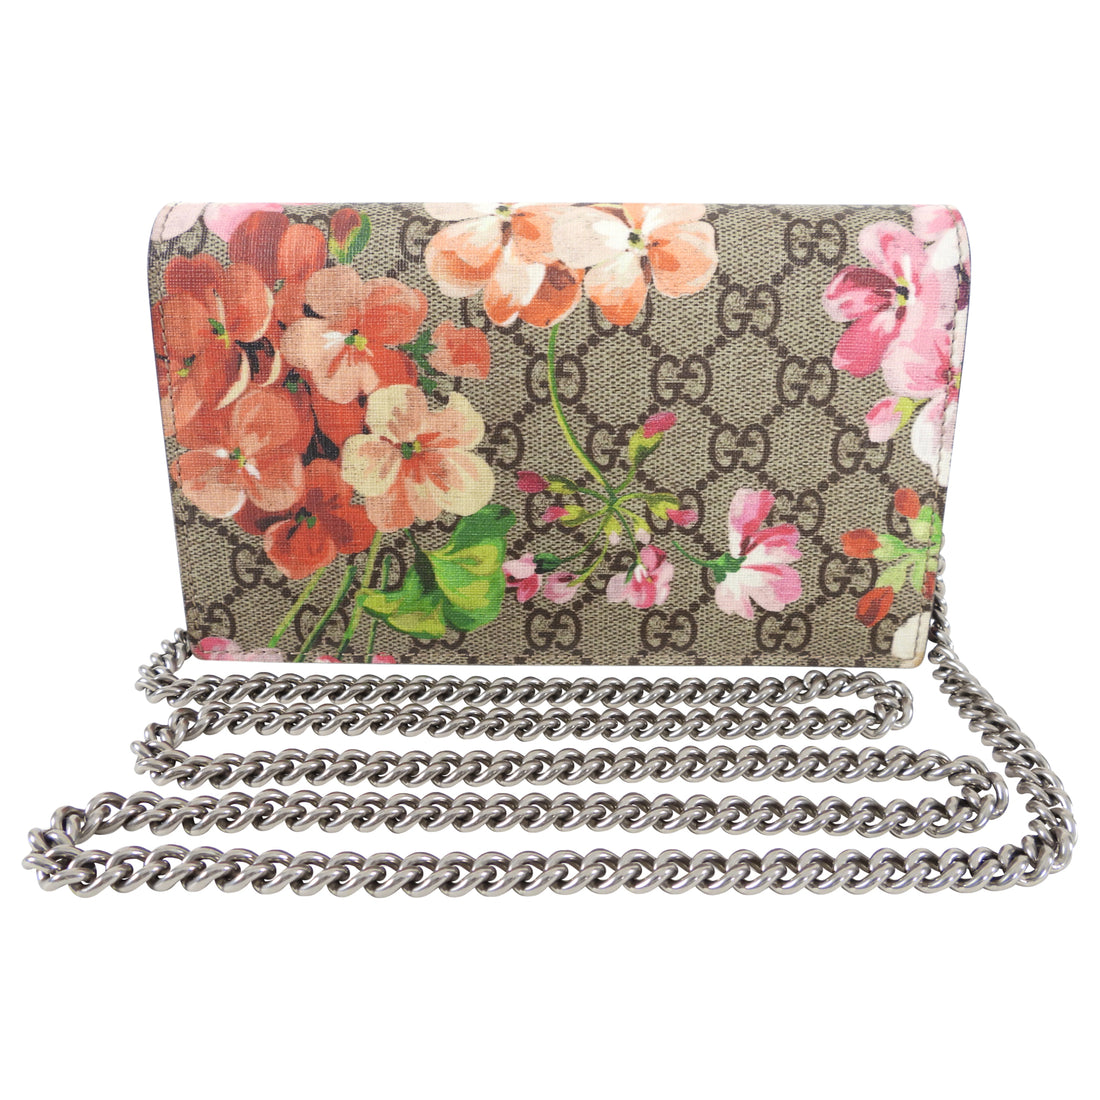 Authentic Gucci Floral Blooms Pink Supreme Chain Wallet Crossbody Medium Bag